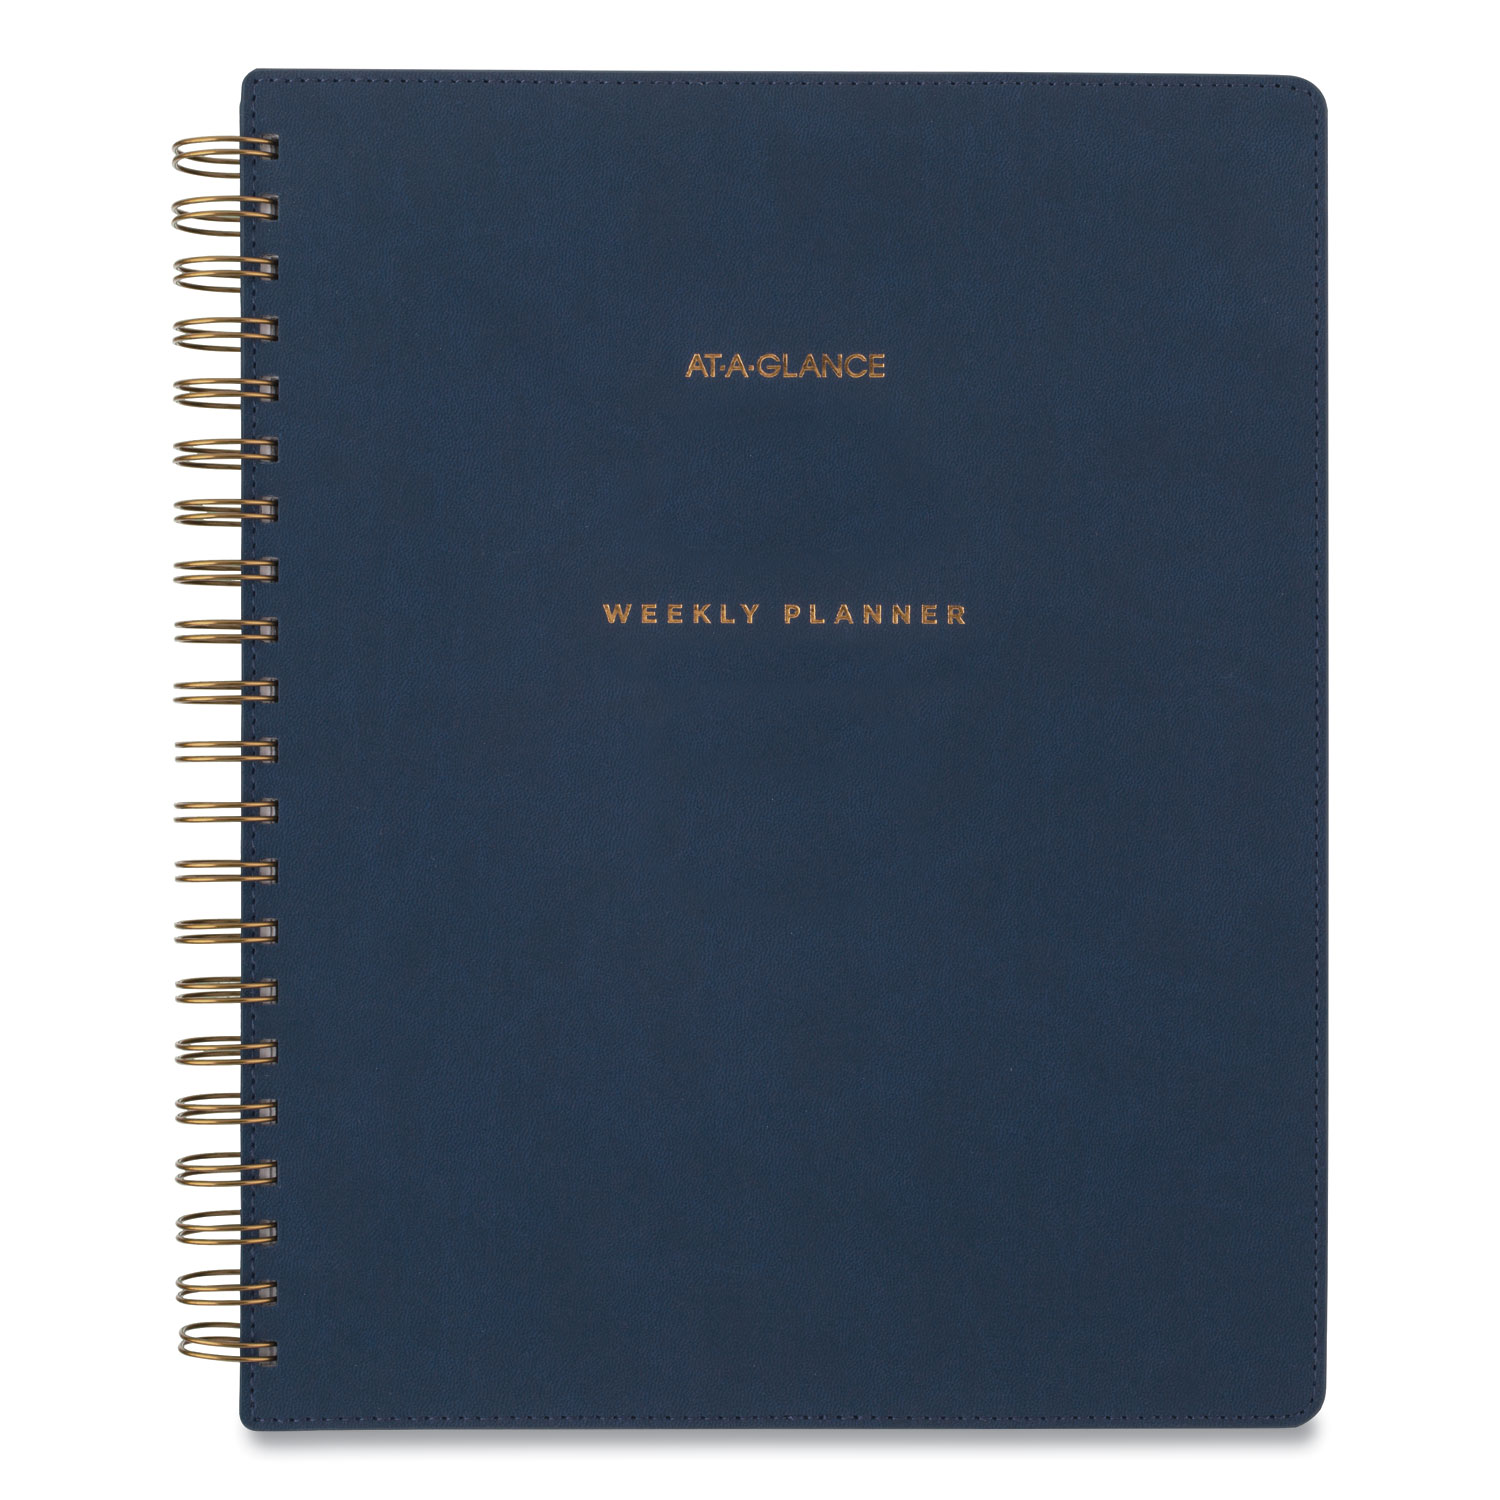  AT-A-GLANCE YP90520 Signature Collection Firenze Navy Weekly/Monthly Planner, 11 x 8 3/8, 2020-2021 (AAGYP90520) 